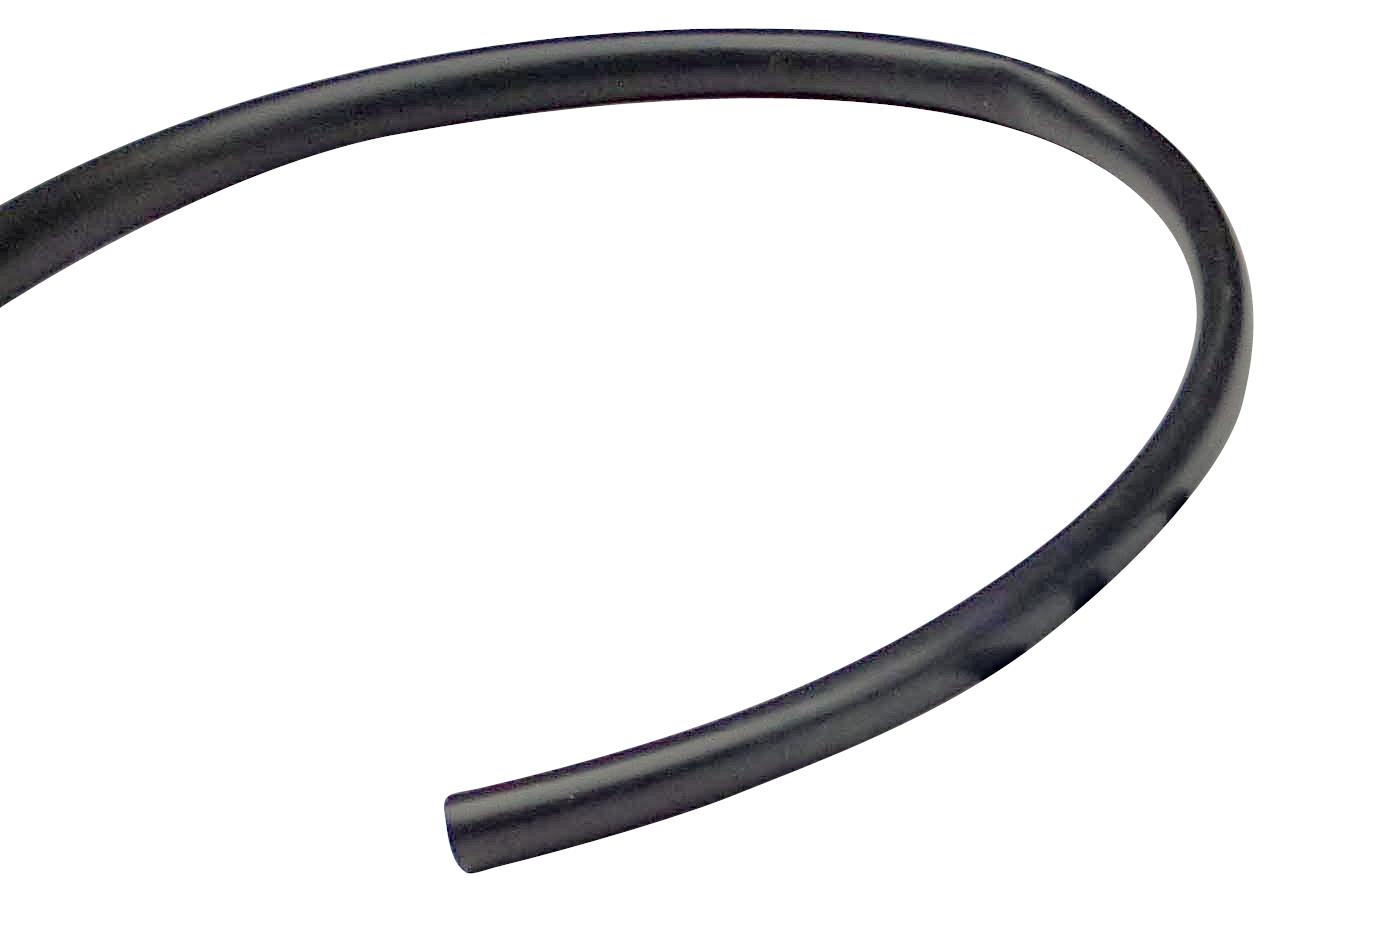 Protective hose for Bowden cables and cables in frame